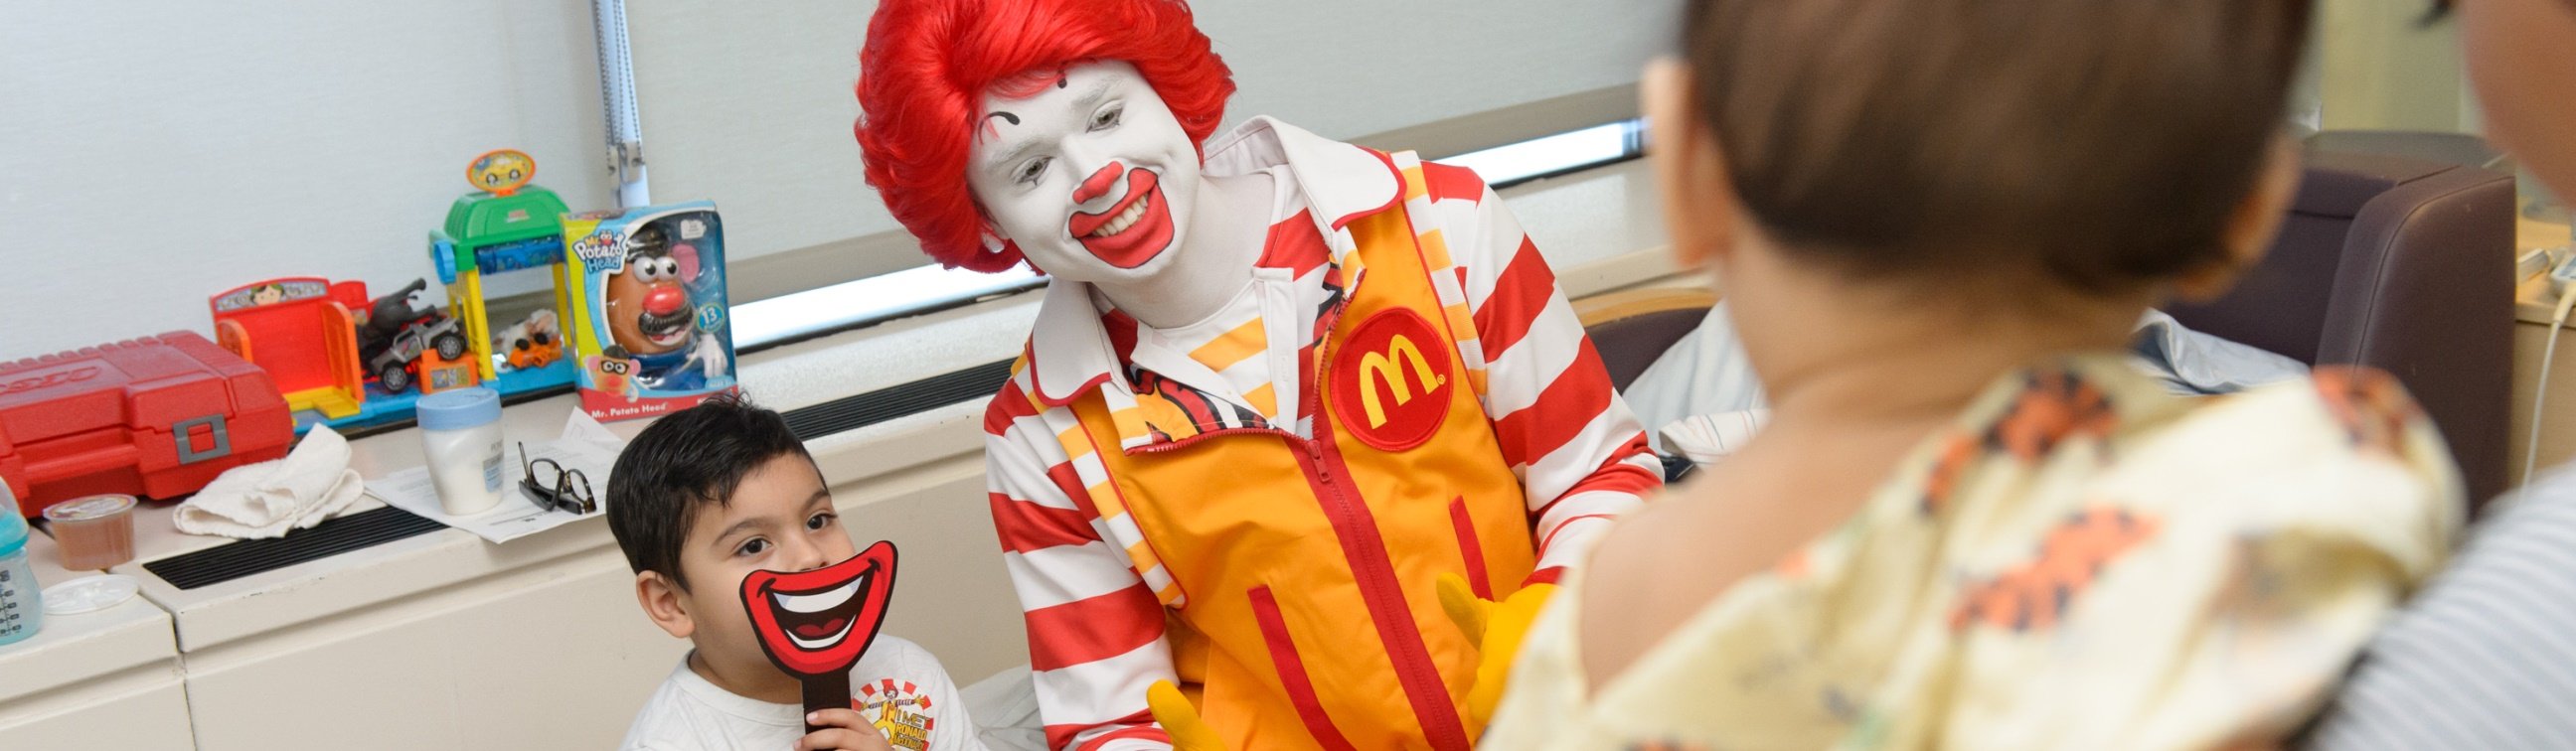 Local kids with asthma get support from Ronald McDonald House Charities